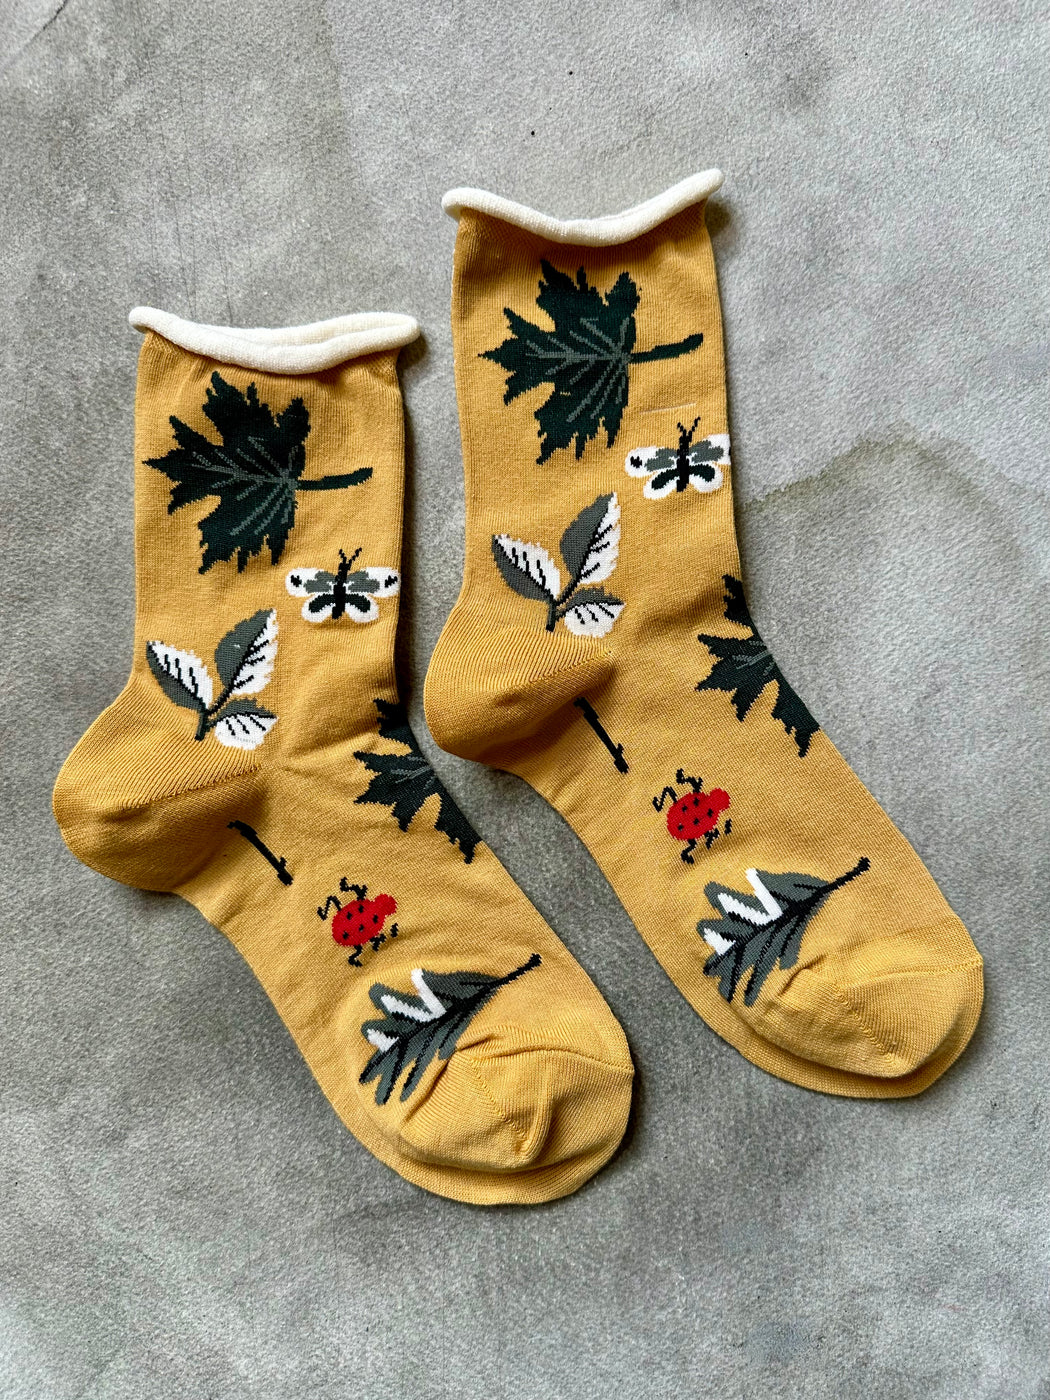 "Nature" Socks by Hansel from Basel